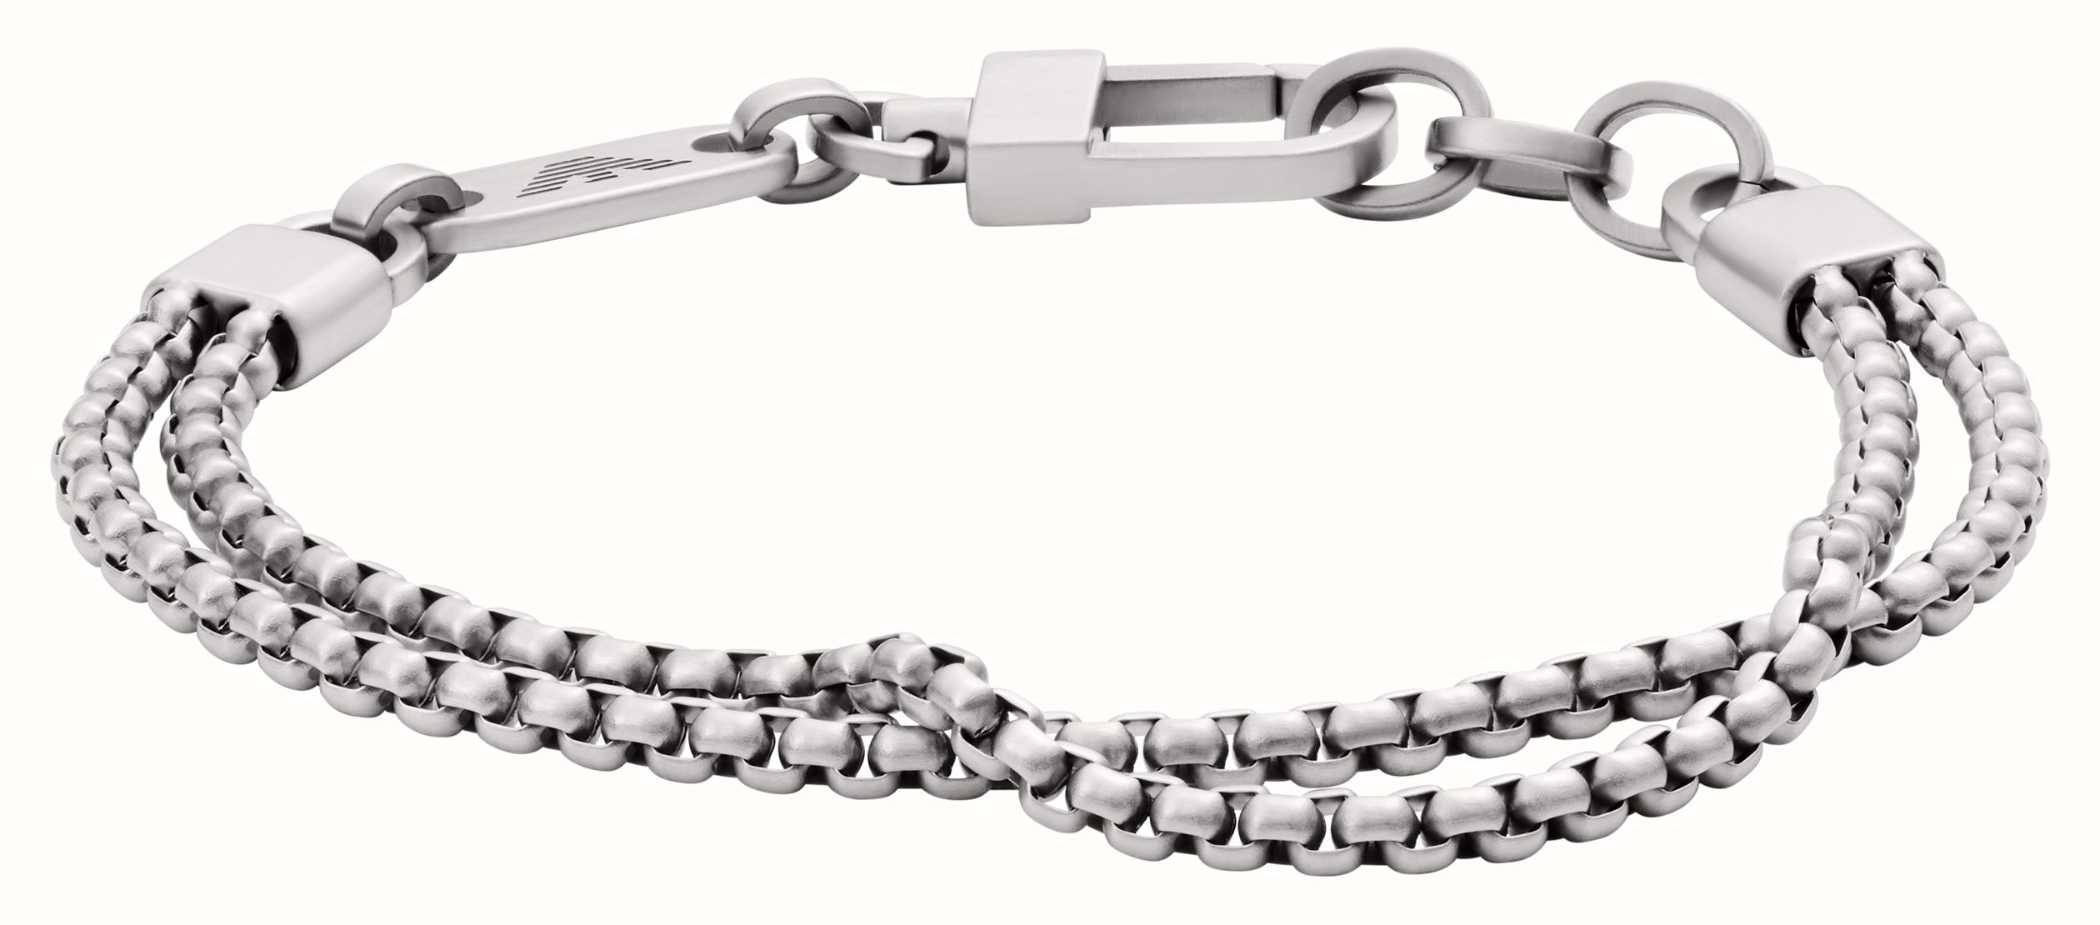 Emporio Armani Men\'s Asymmetrical Stainless - Watches™ EGS2805040 USA Bracelet Chain Class First Steel